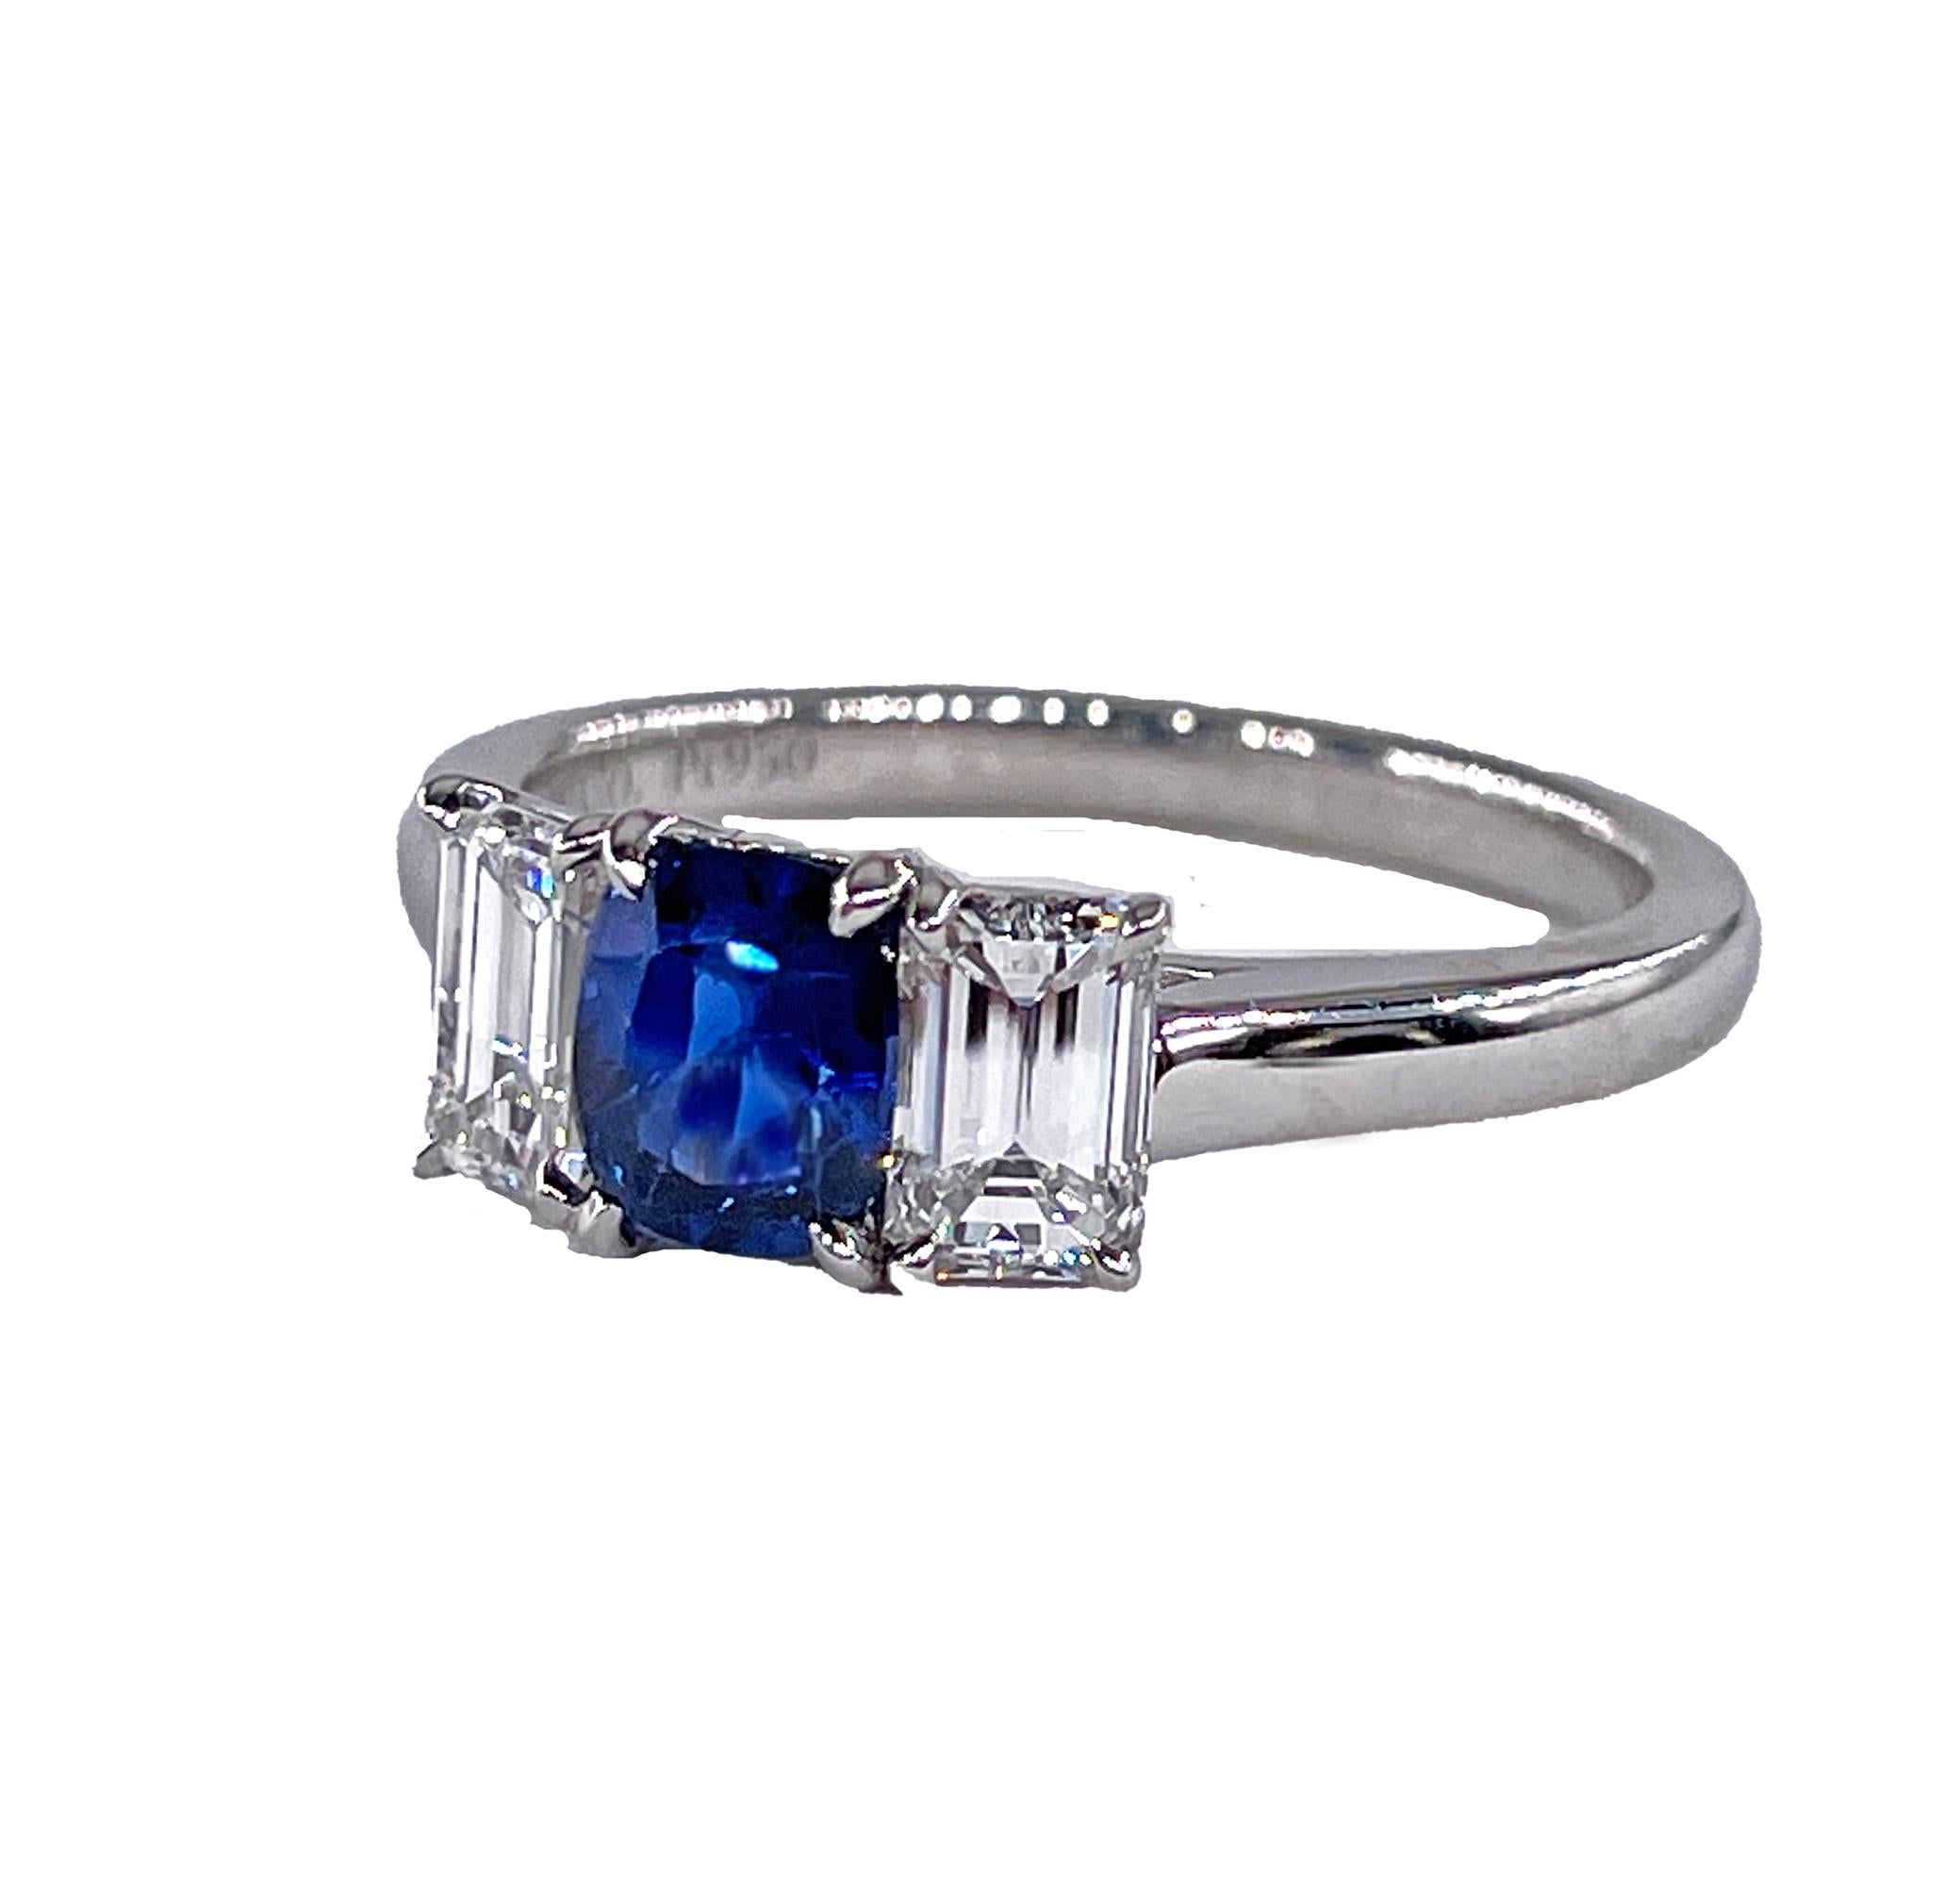 GIA Vintage TIFFANY & Co 1.75ctw No-Heat Blue Sapphire and Diamond 3 Stone Platinum Ring
TIFFANY & Co - The most famous Brand in the World! The perfect Gift for any Women and for any occasion. From our Estate Vintage Collection. 
A VERY ELEGANT